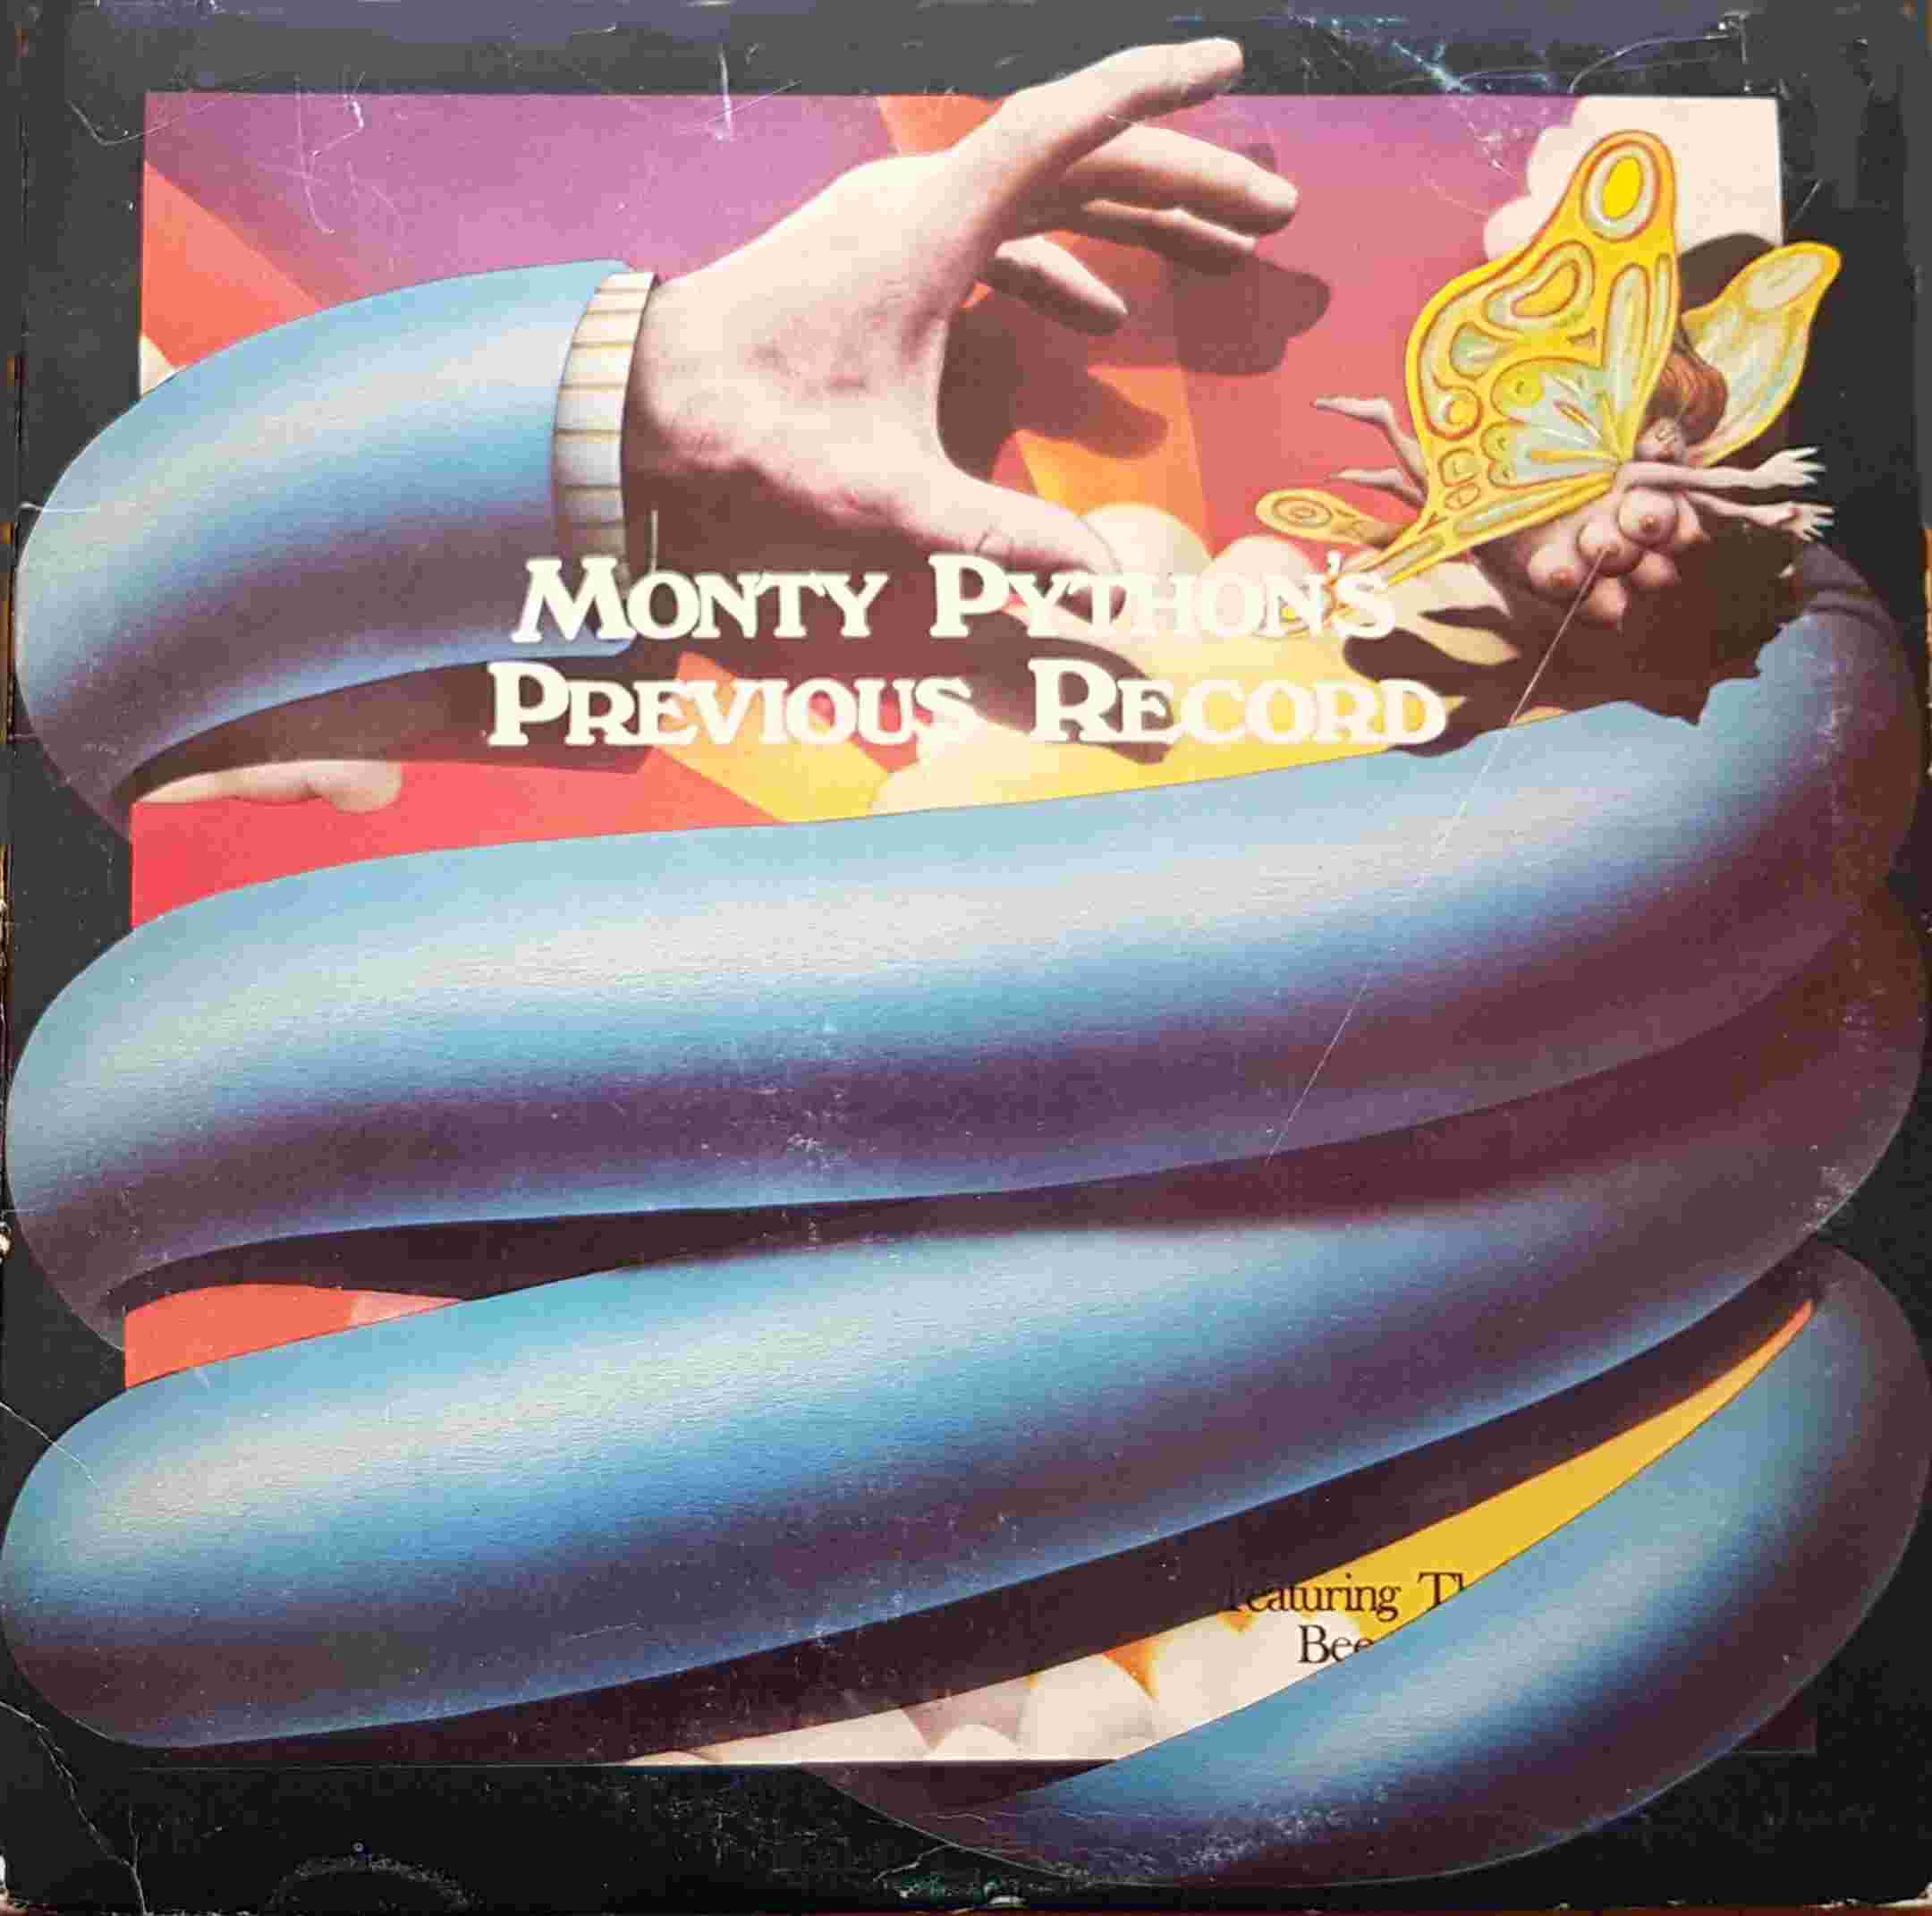 Picture of Monty Python's previous record by artist Monty Python from the BBC albums - Records and Tapes library